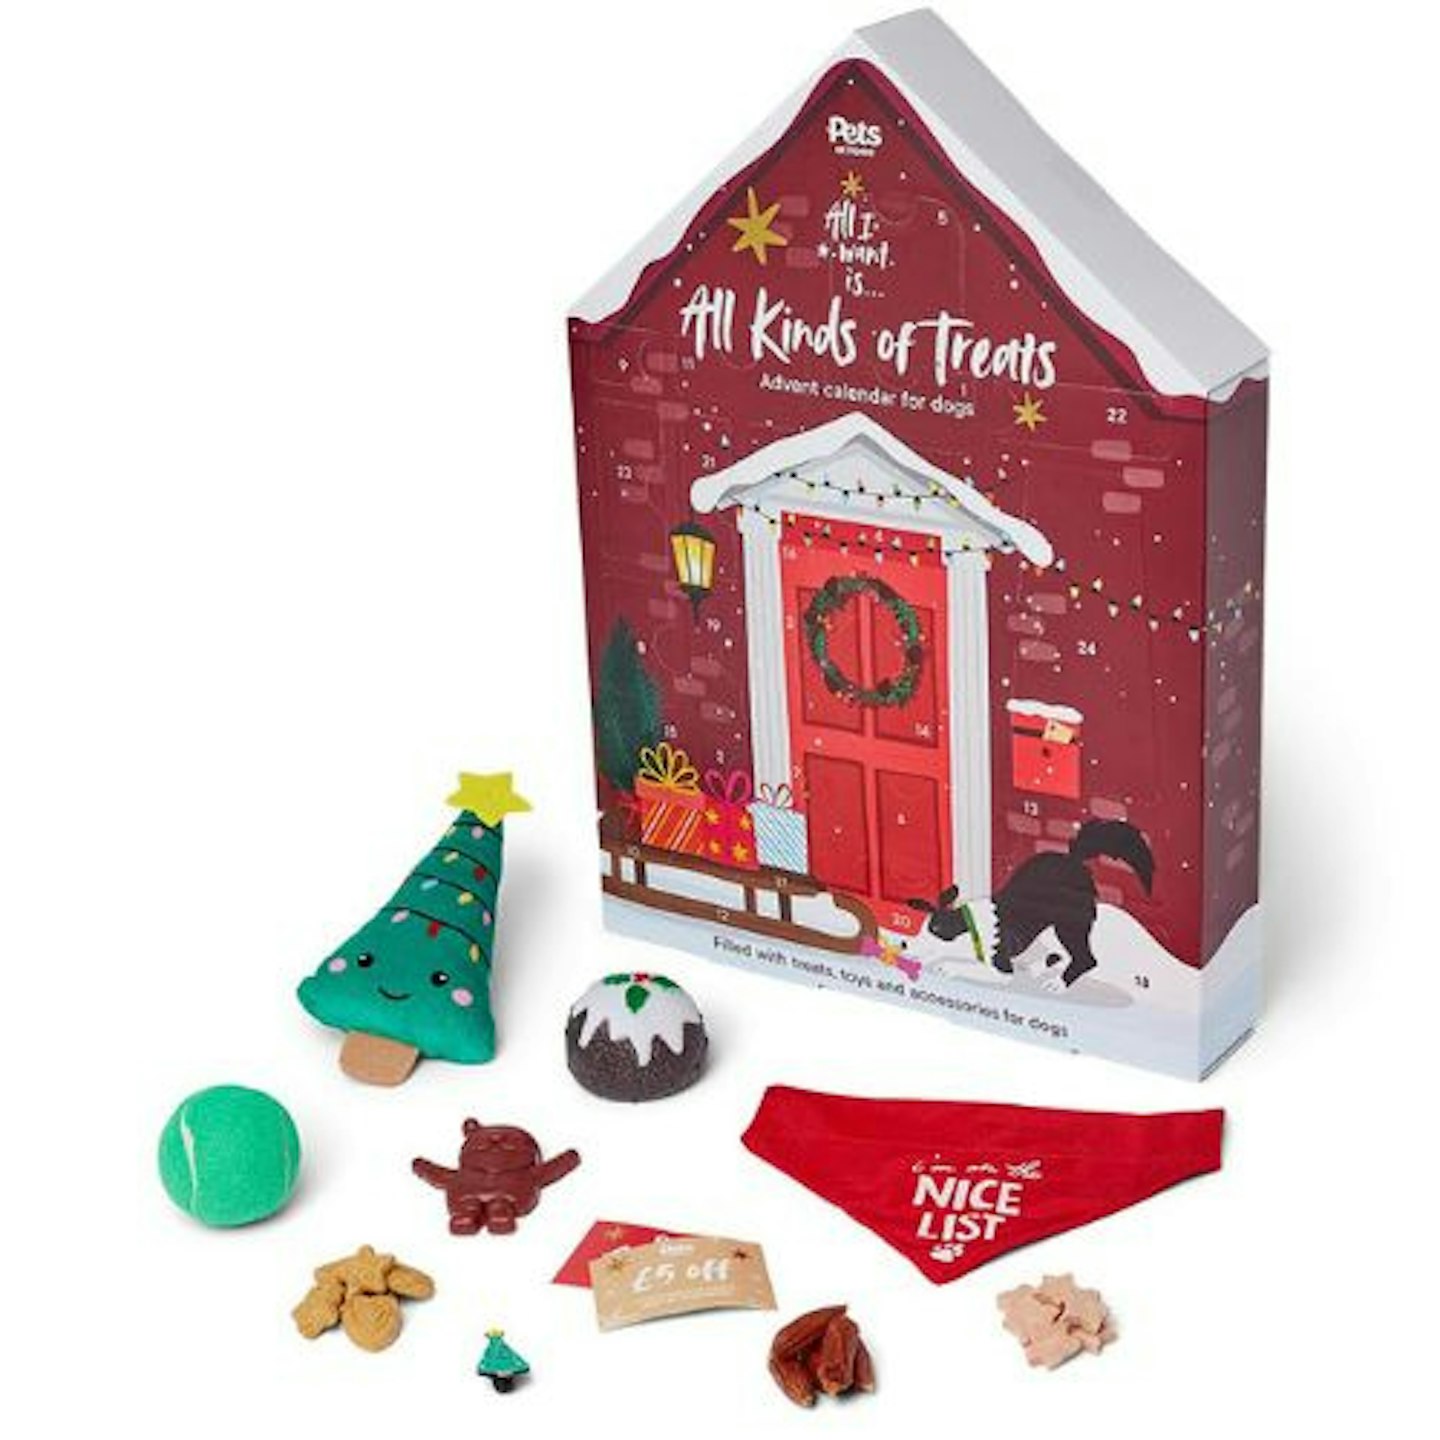 Pets at Home Christmas Giant Treat Advent Calendar For Dogs